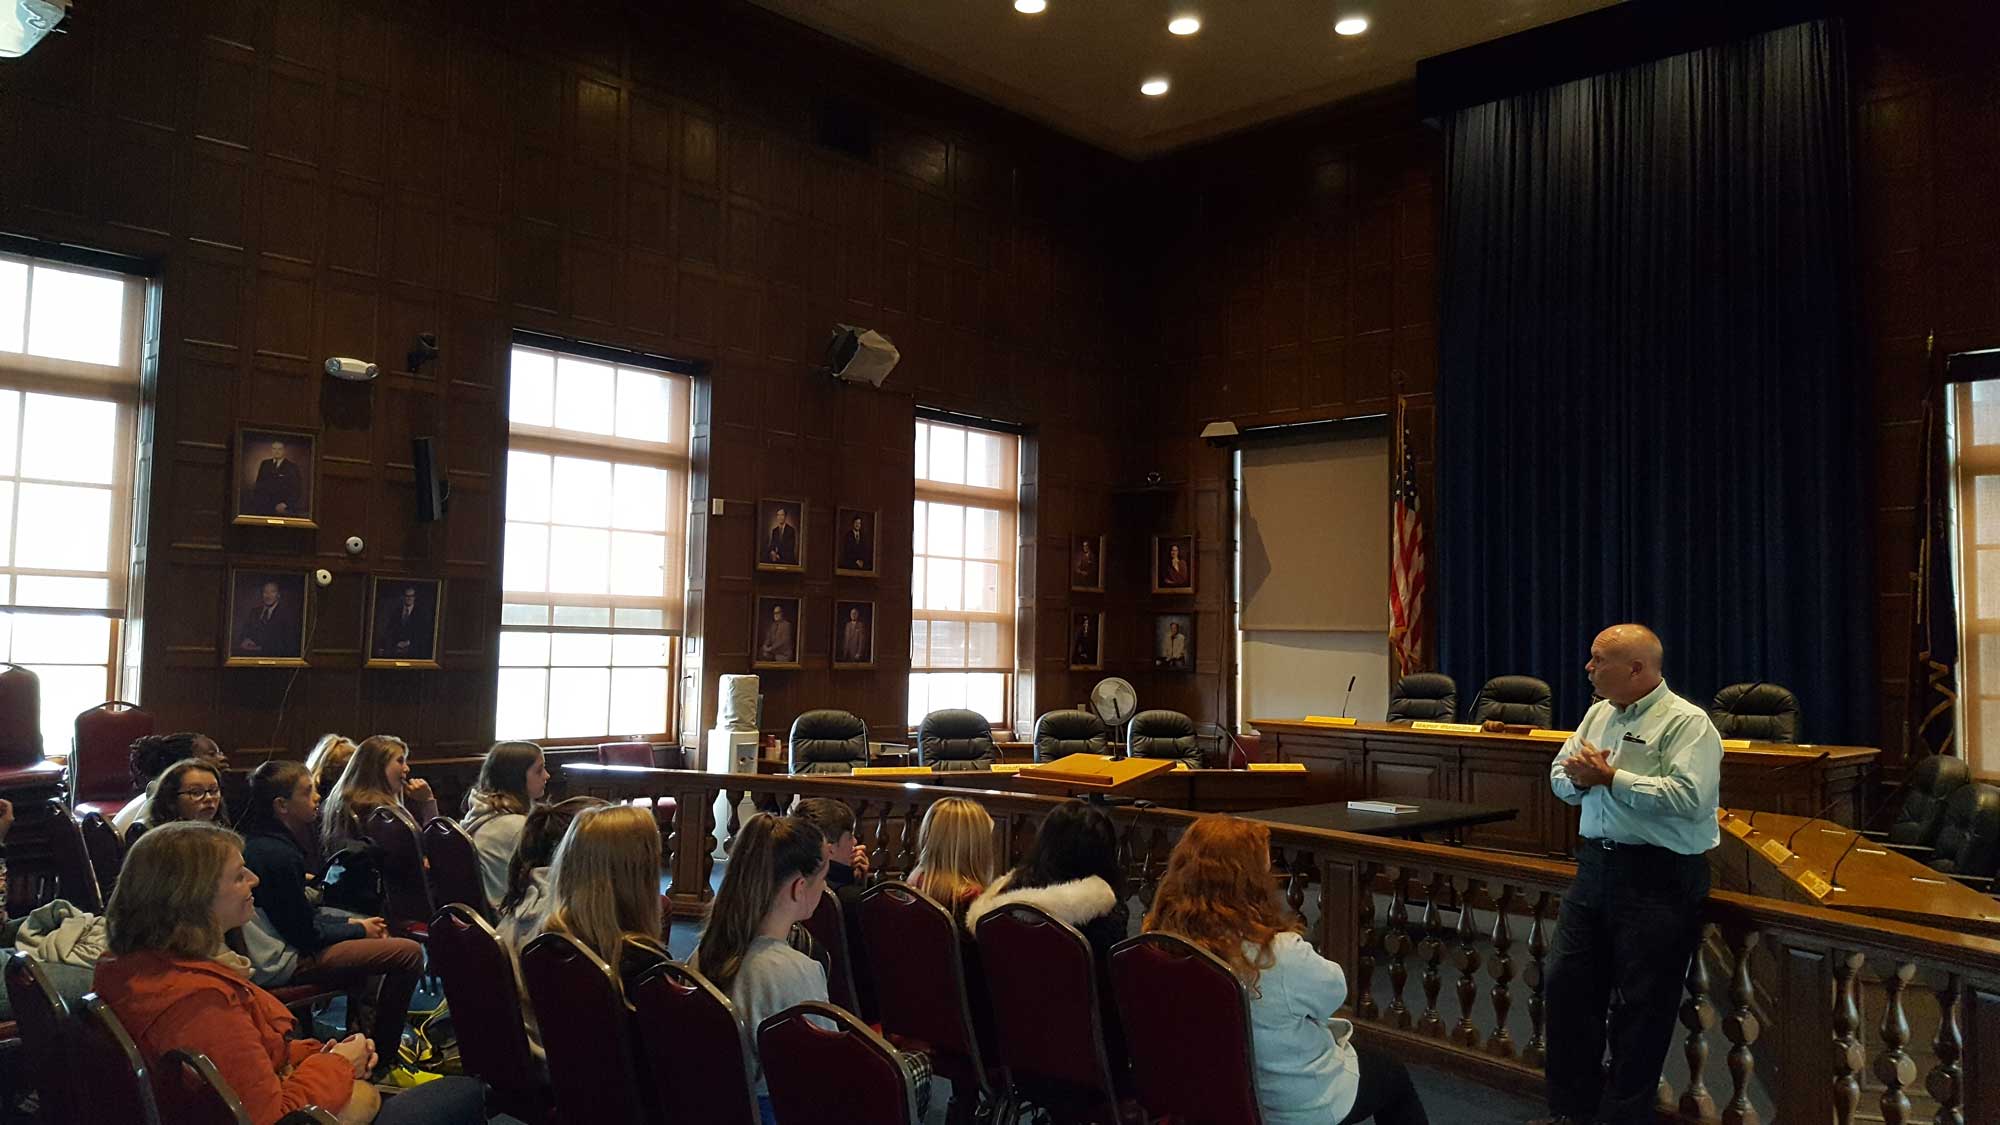 Rossett School students visit the Council Chamber at Portland City Hall during their American Exchange visit